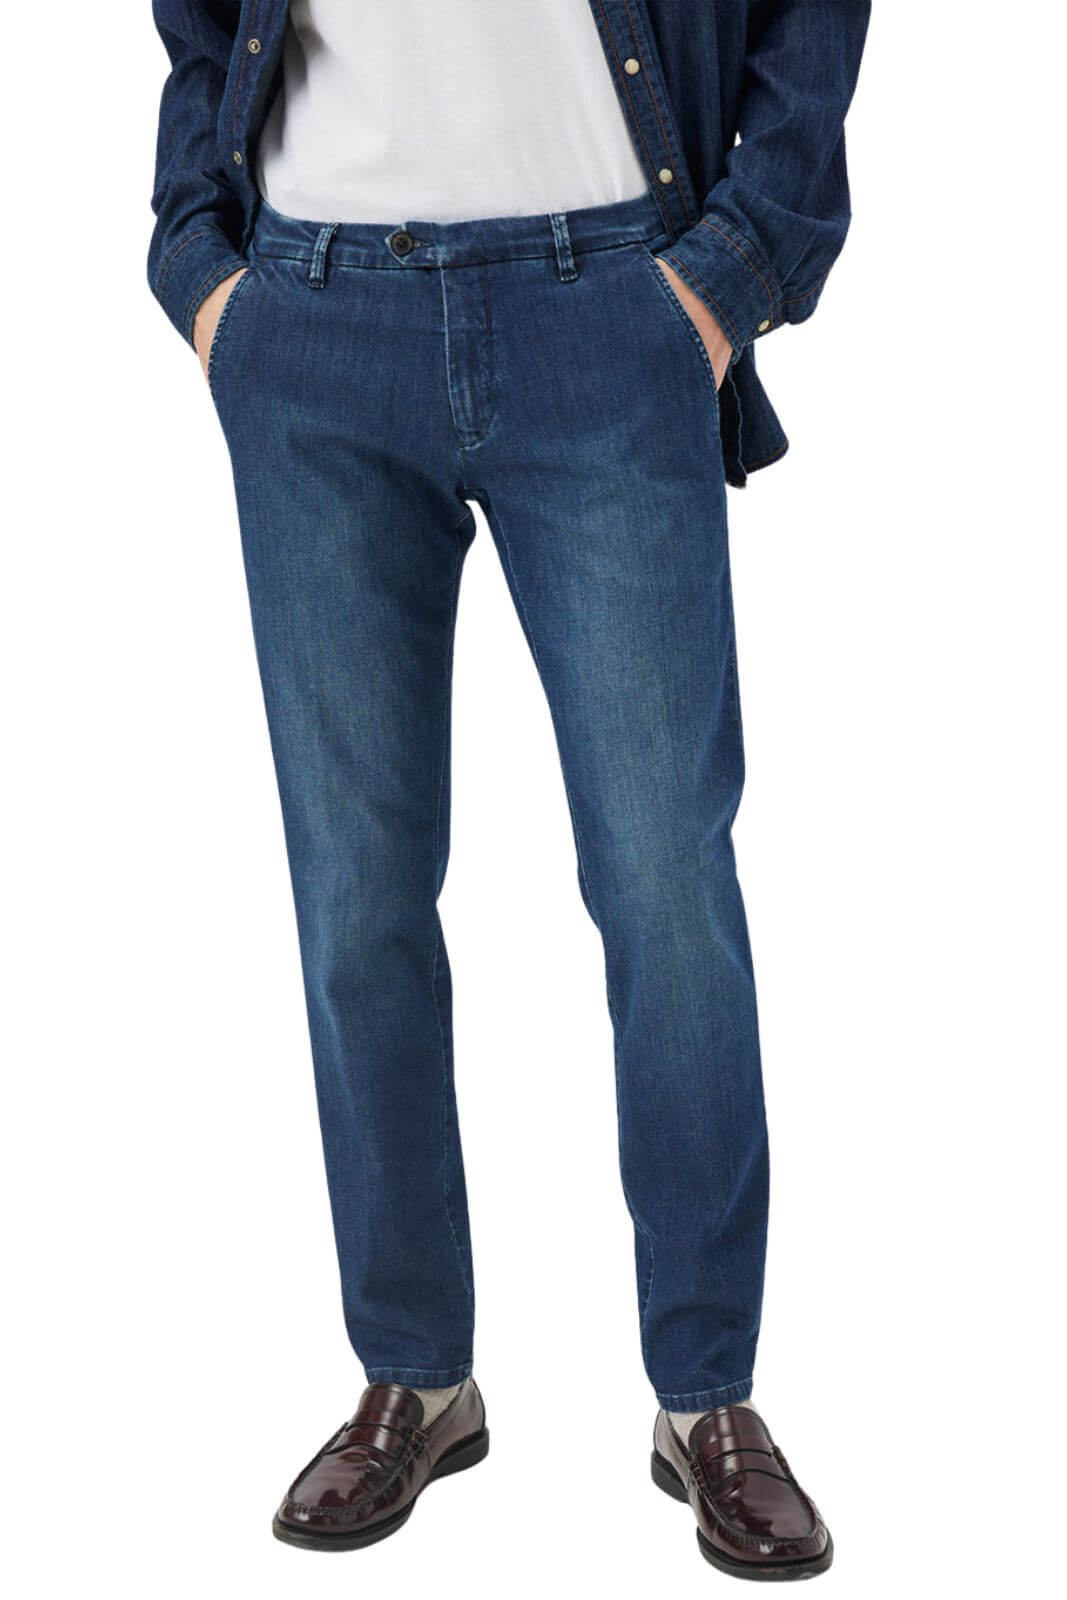 Roy Roger’s jeans uomo New Rolf Mid Wash